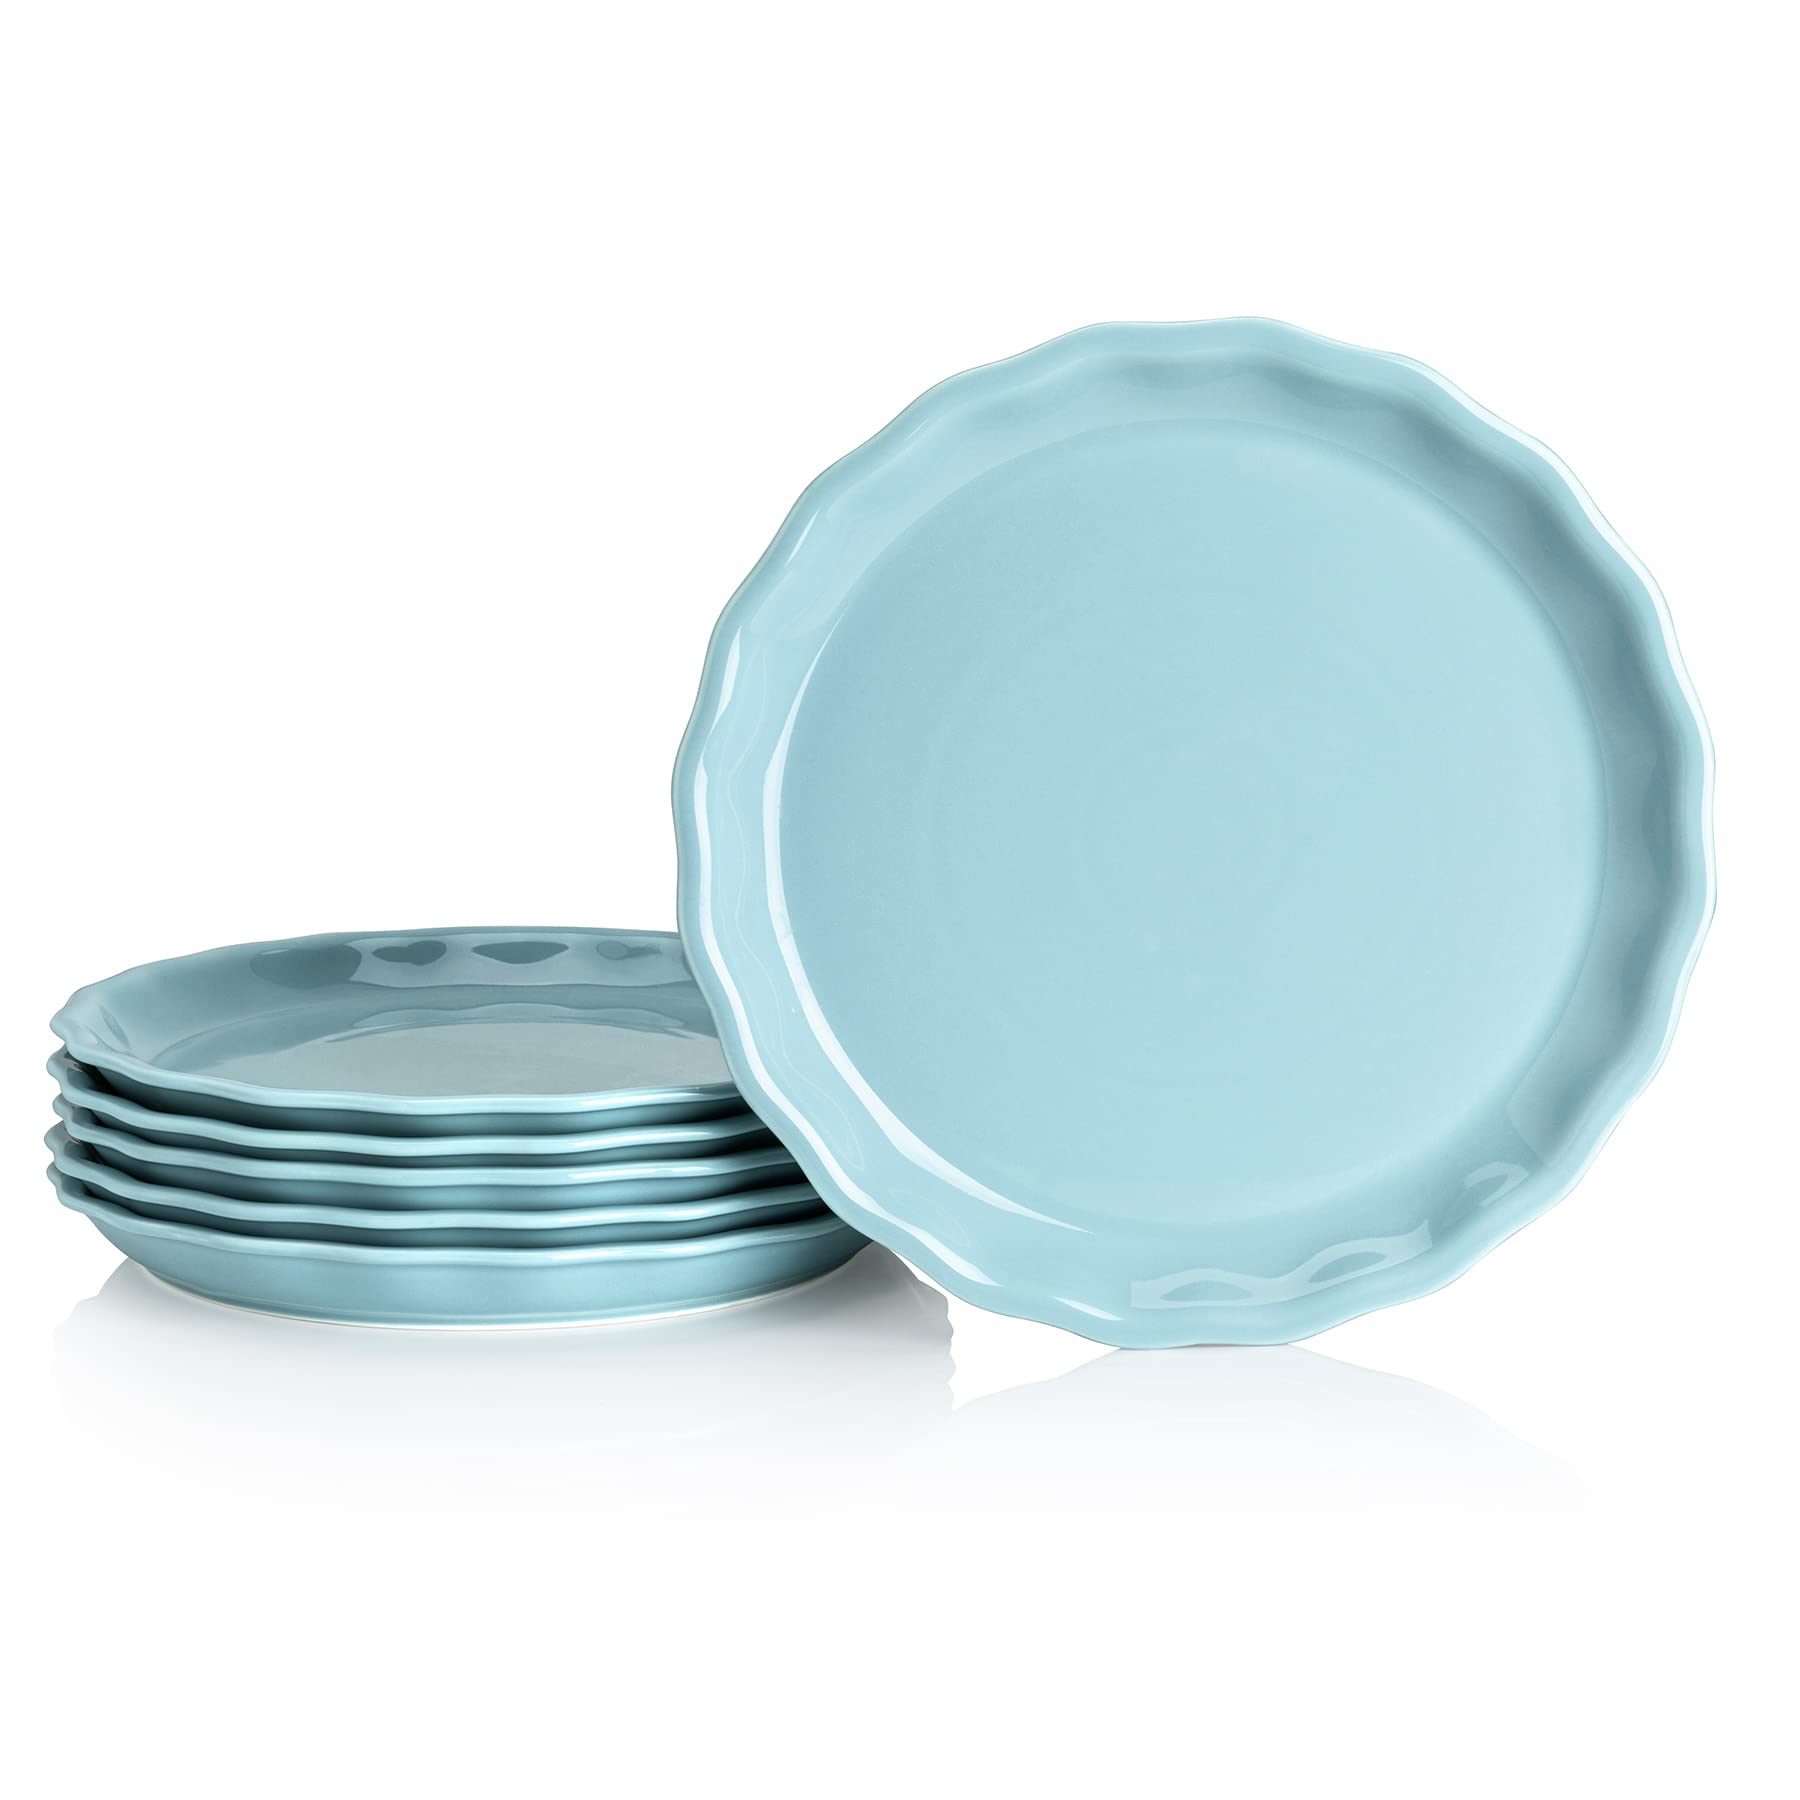 Sweese 167.603 Dinner Plates Set of 6 (Multiple colors, sizes) $11.99